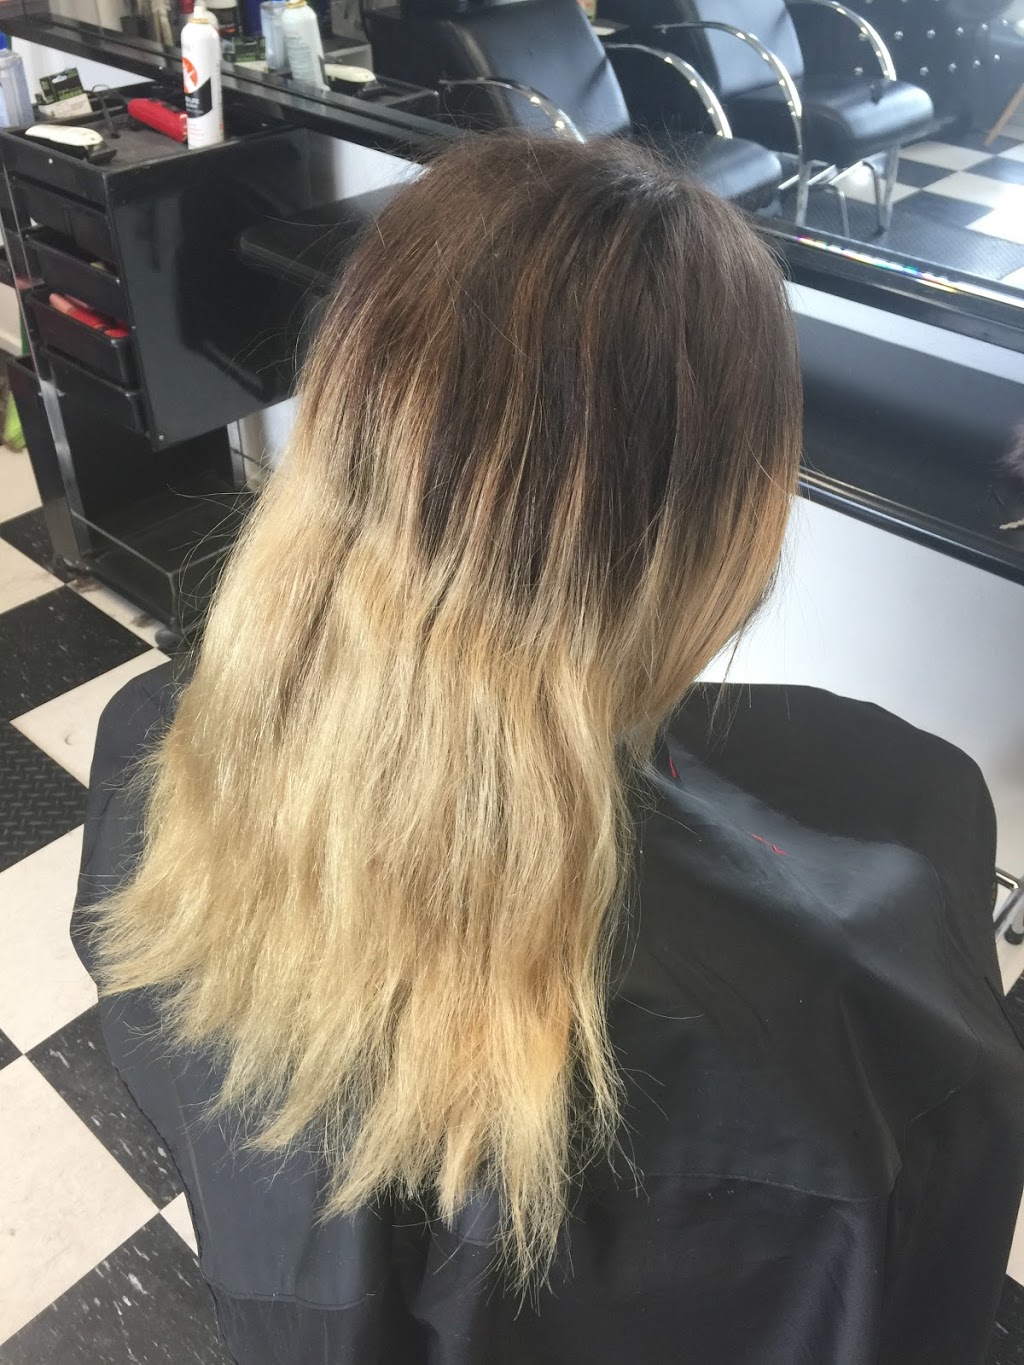 Hair by Janine & Co | hair care | 52a Charles Street, Geelong, Victoria 3219, Newcomb VIC 3219, Australia | 0425851811 OR +61 425 851 811